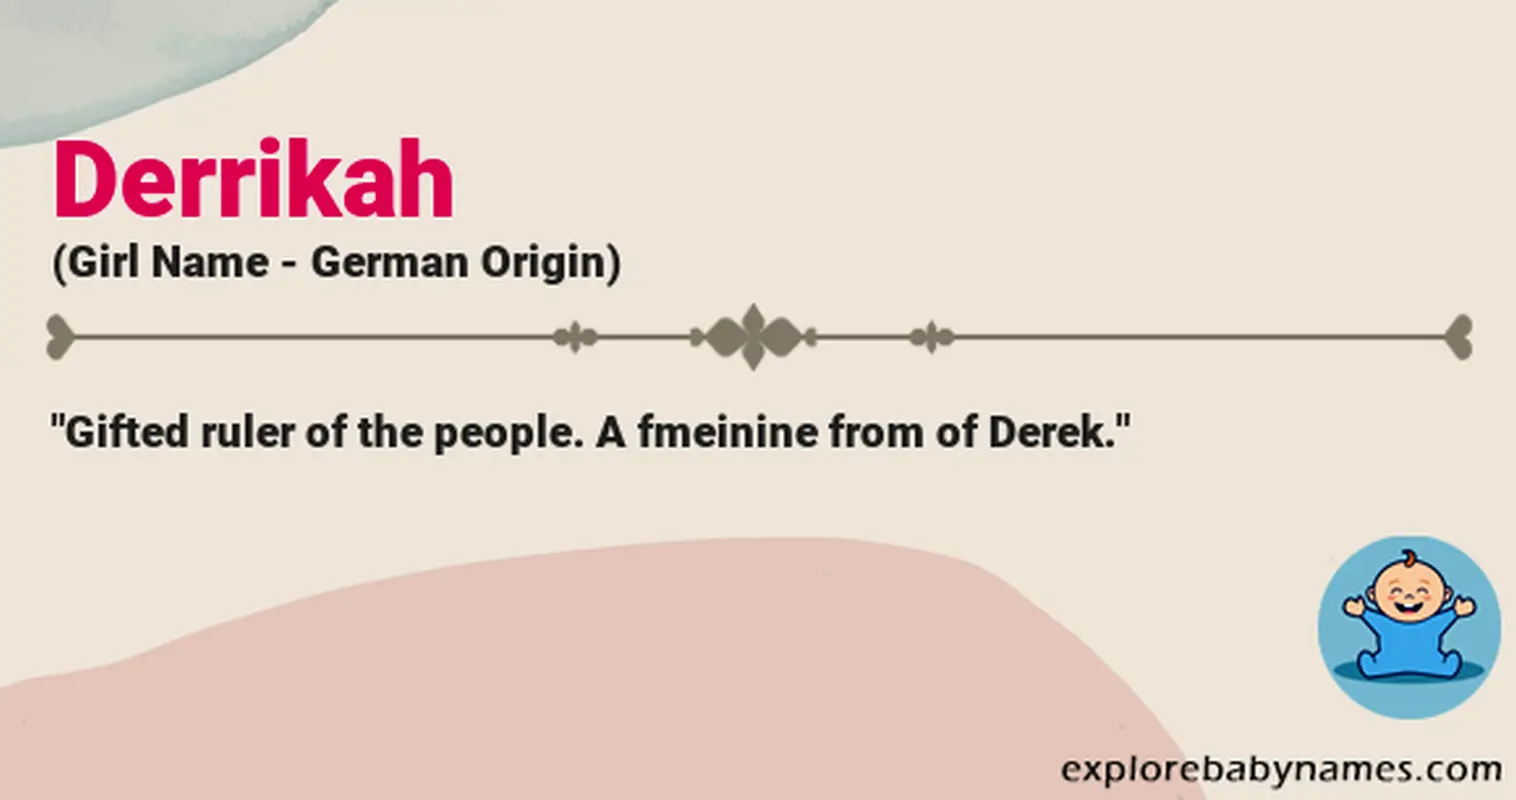 Meaning of Derrikah